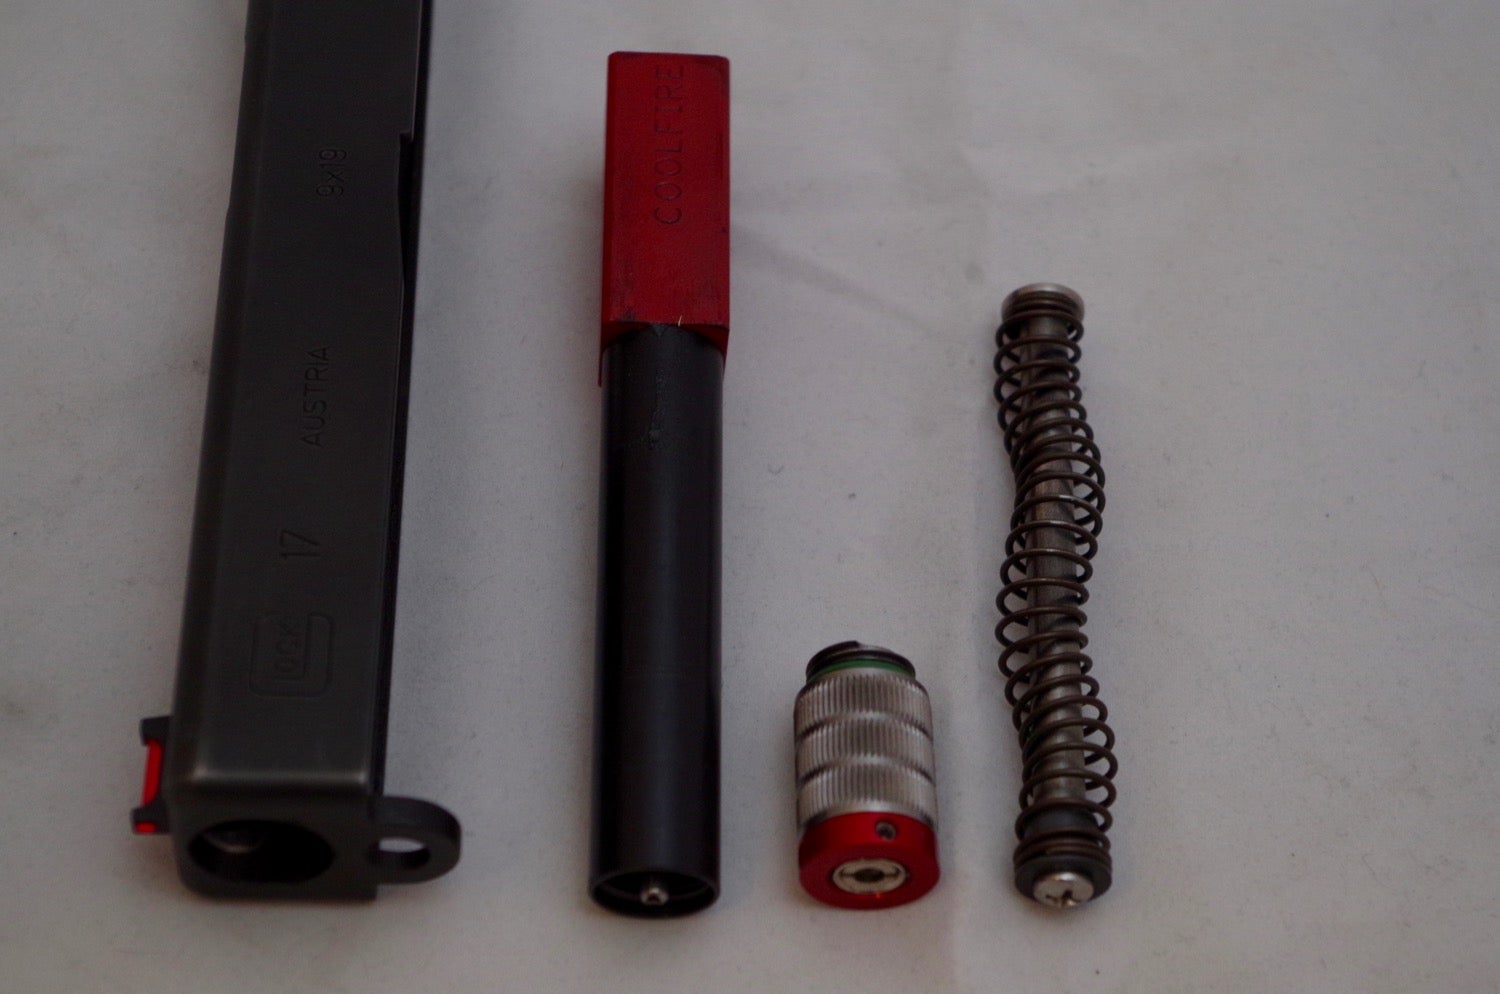 CoolFire components, basically a barrel replacement with spring, and a laser.